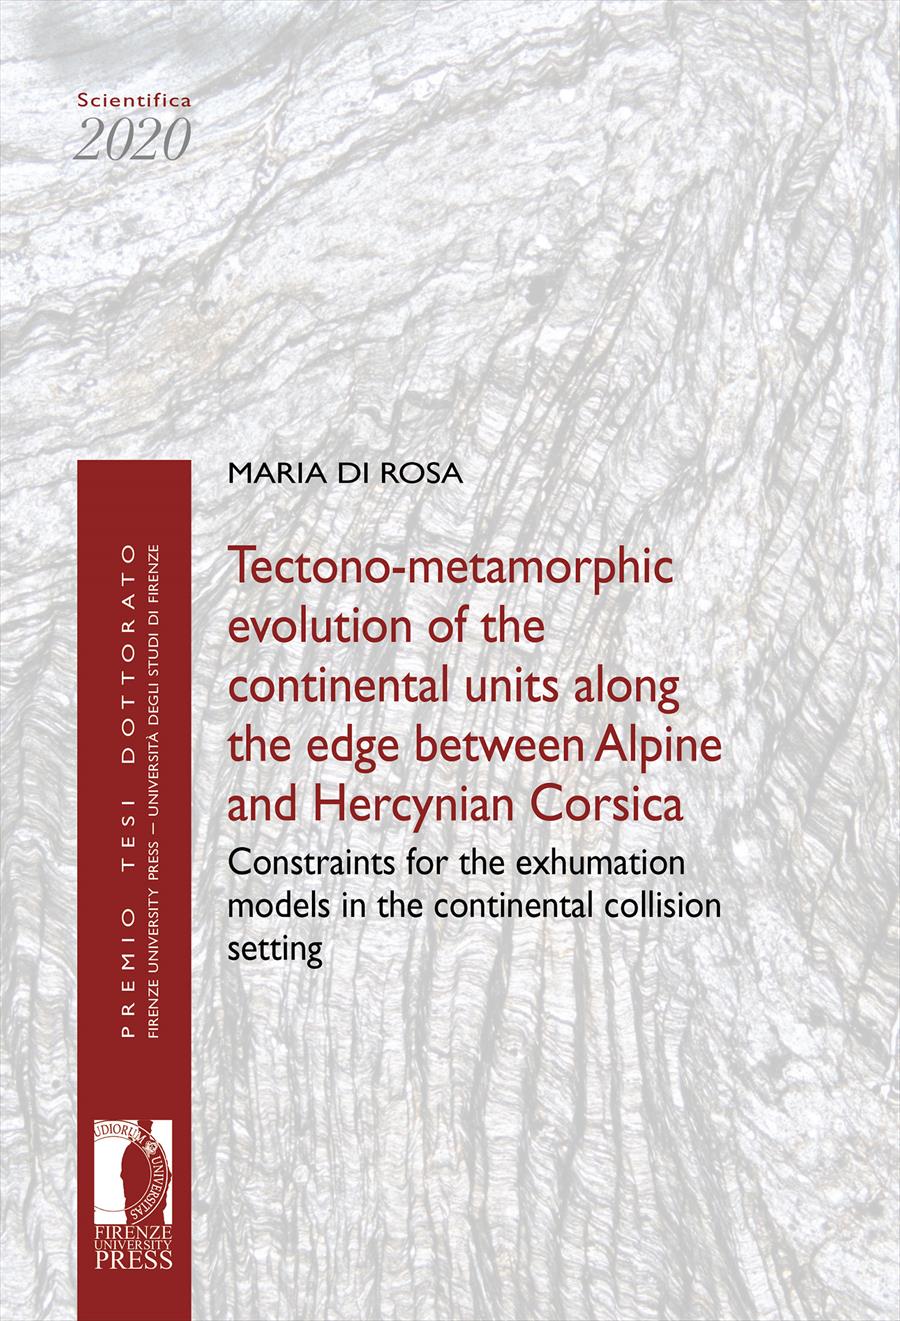 Tectono-metamorphic evolution of the continental units along the edge between Alpine and Hercynian Corsica